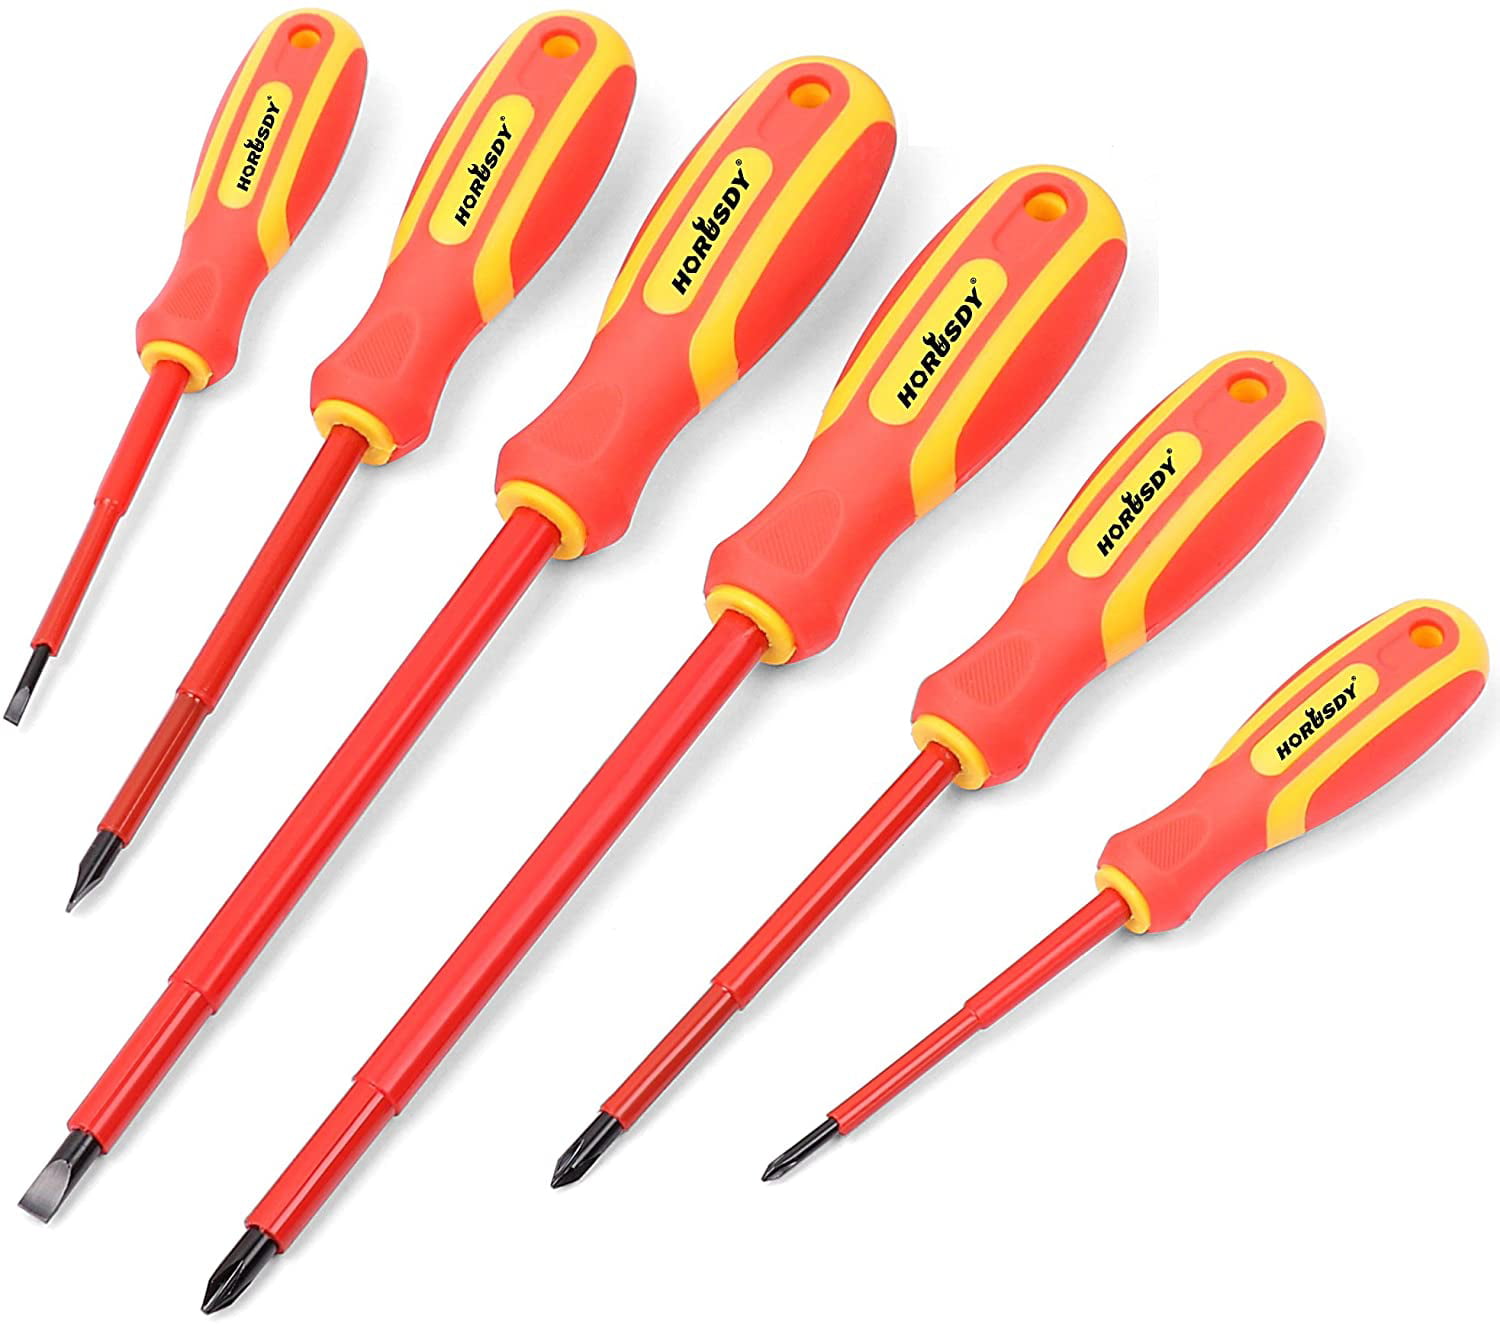 New 7 pc ELECTRICIAN'S INSULATED ELECTRICAL HAND SCREWDRIVER TOOL SET Free Ship